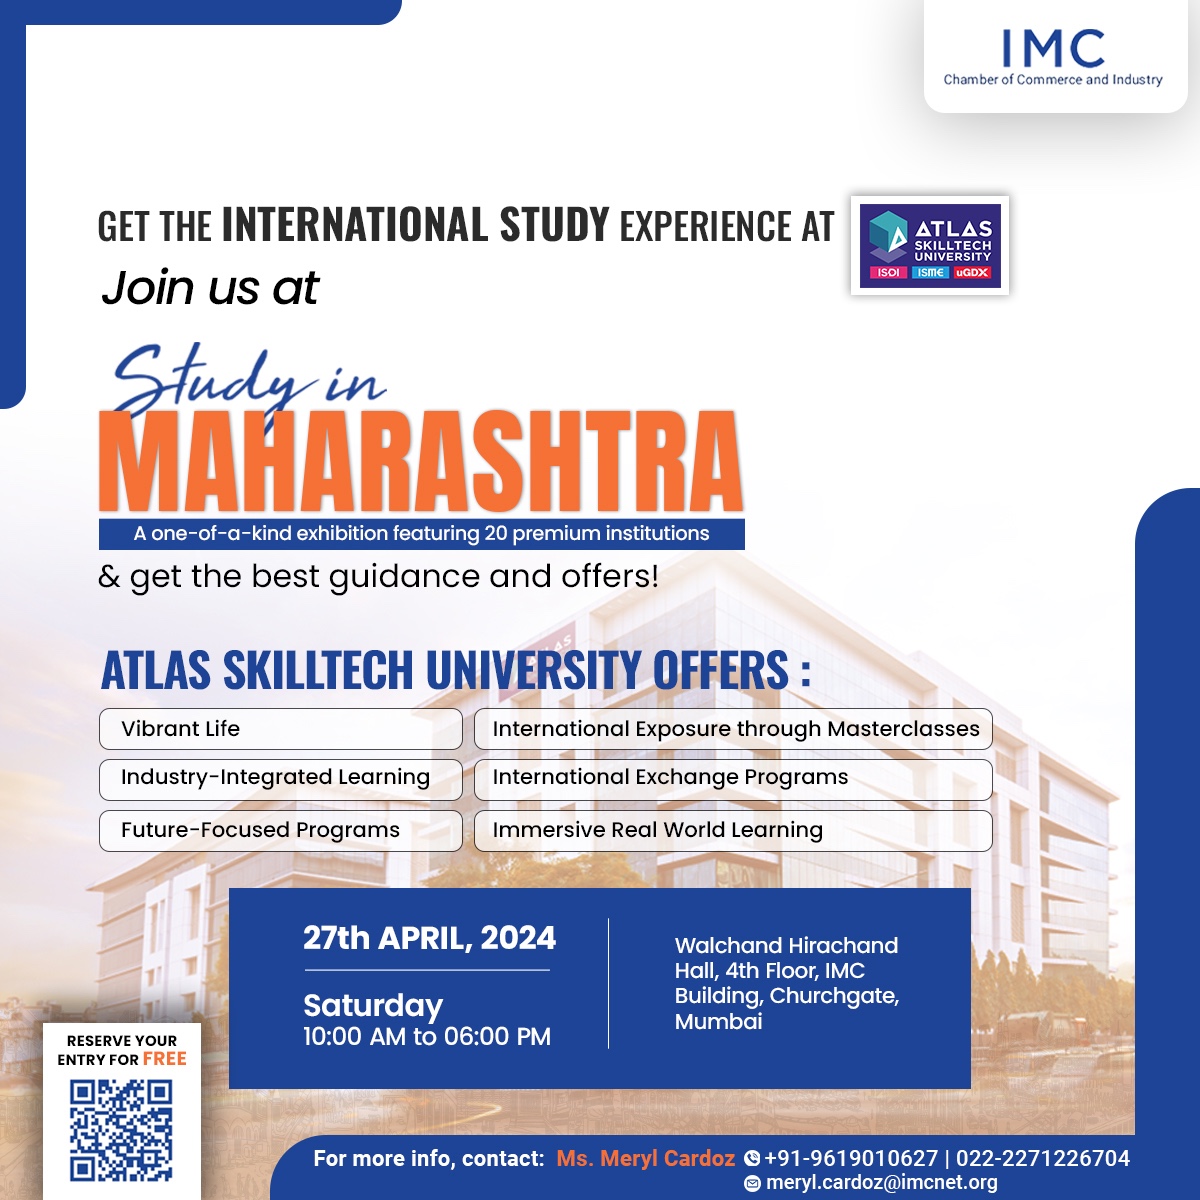 Join us at the #StudyInMaharashtra and explore Multidisciplinary future focused programs & Industry integrated learning at @atlasskilltech 🗓️ Date: 27th April, 2024 (Saturday) 🕰️ Time: 10:00 AM - 06:00 PM 📍 Venue: Walchand Hirachand Hall, 4th Floor, IMC Building, Churchgate,